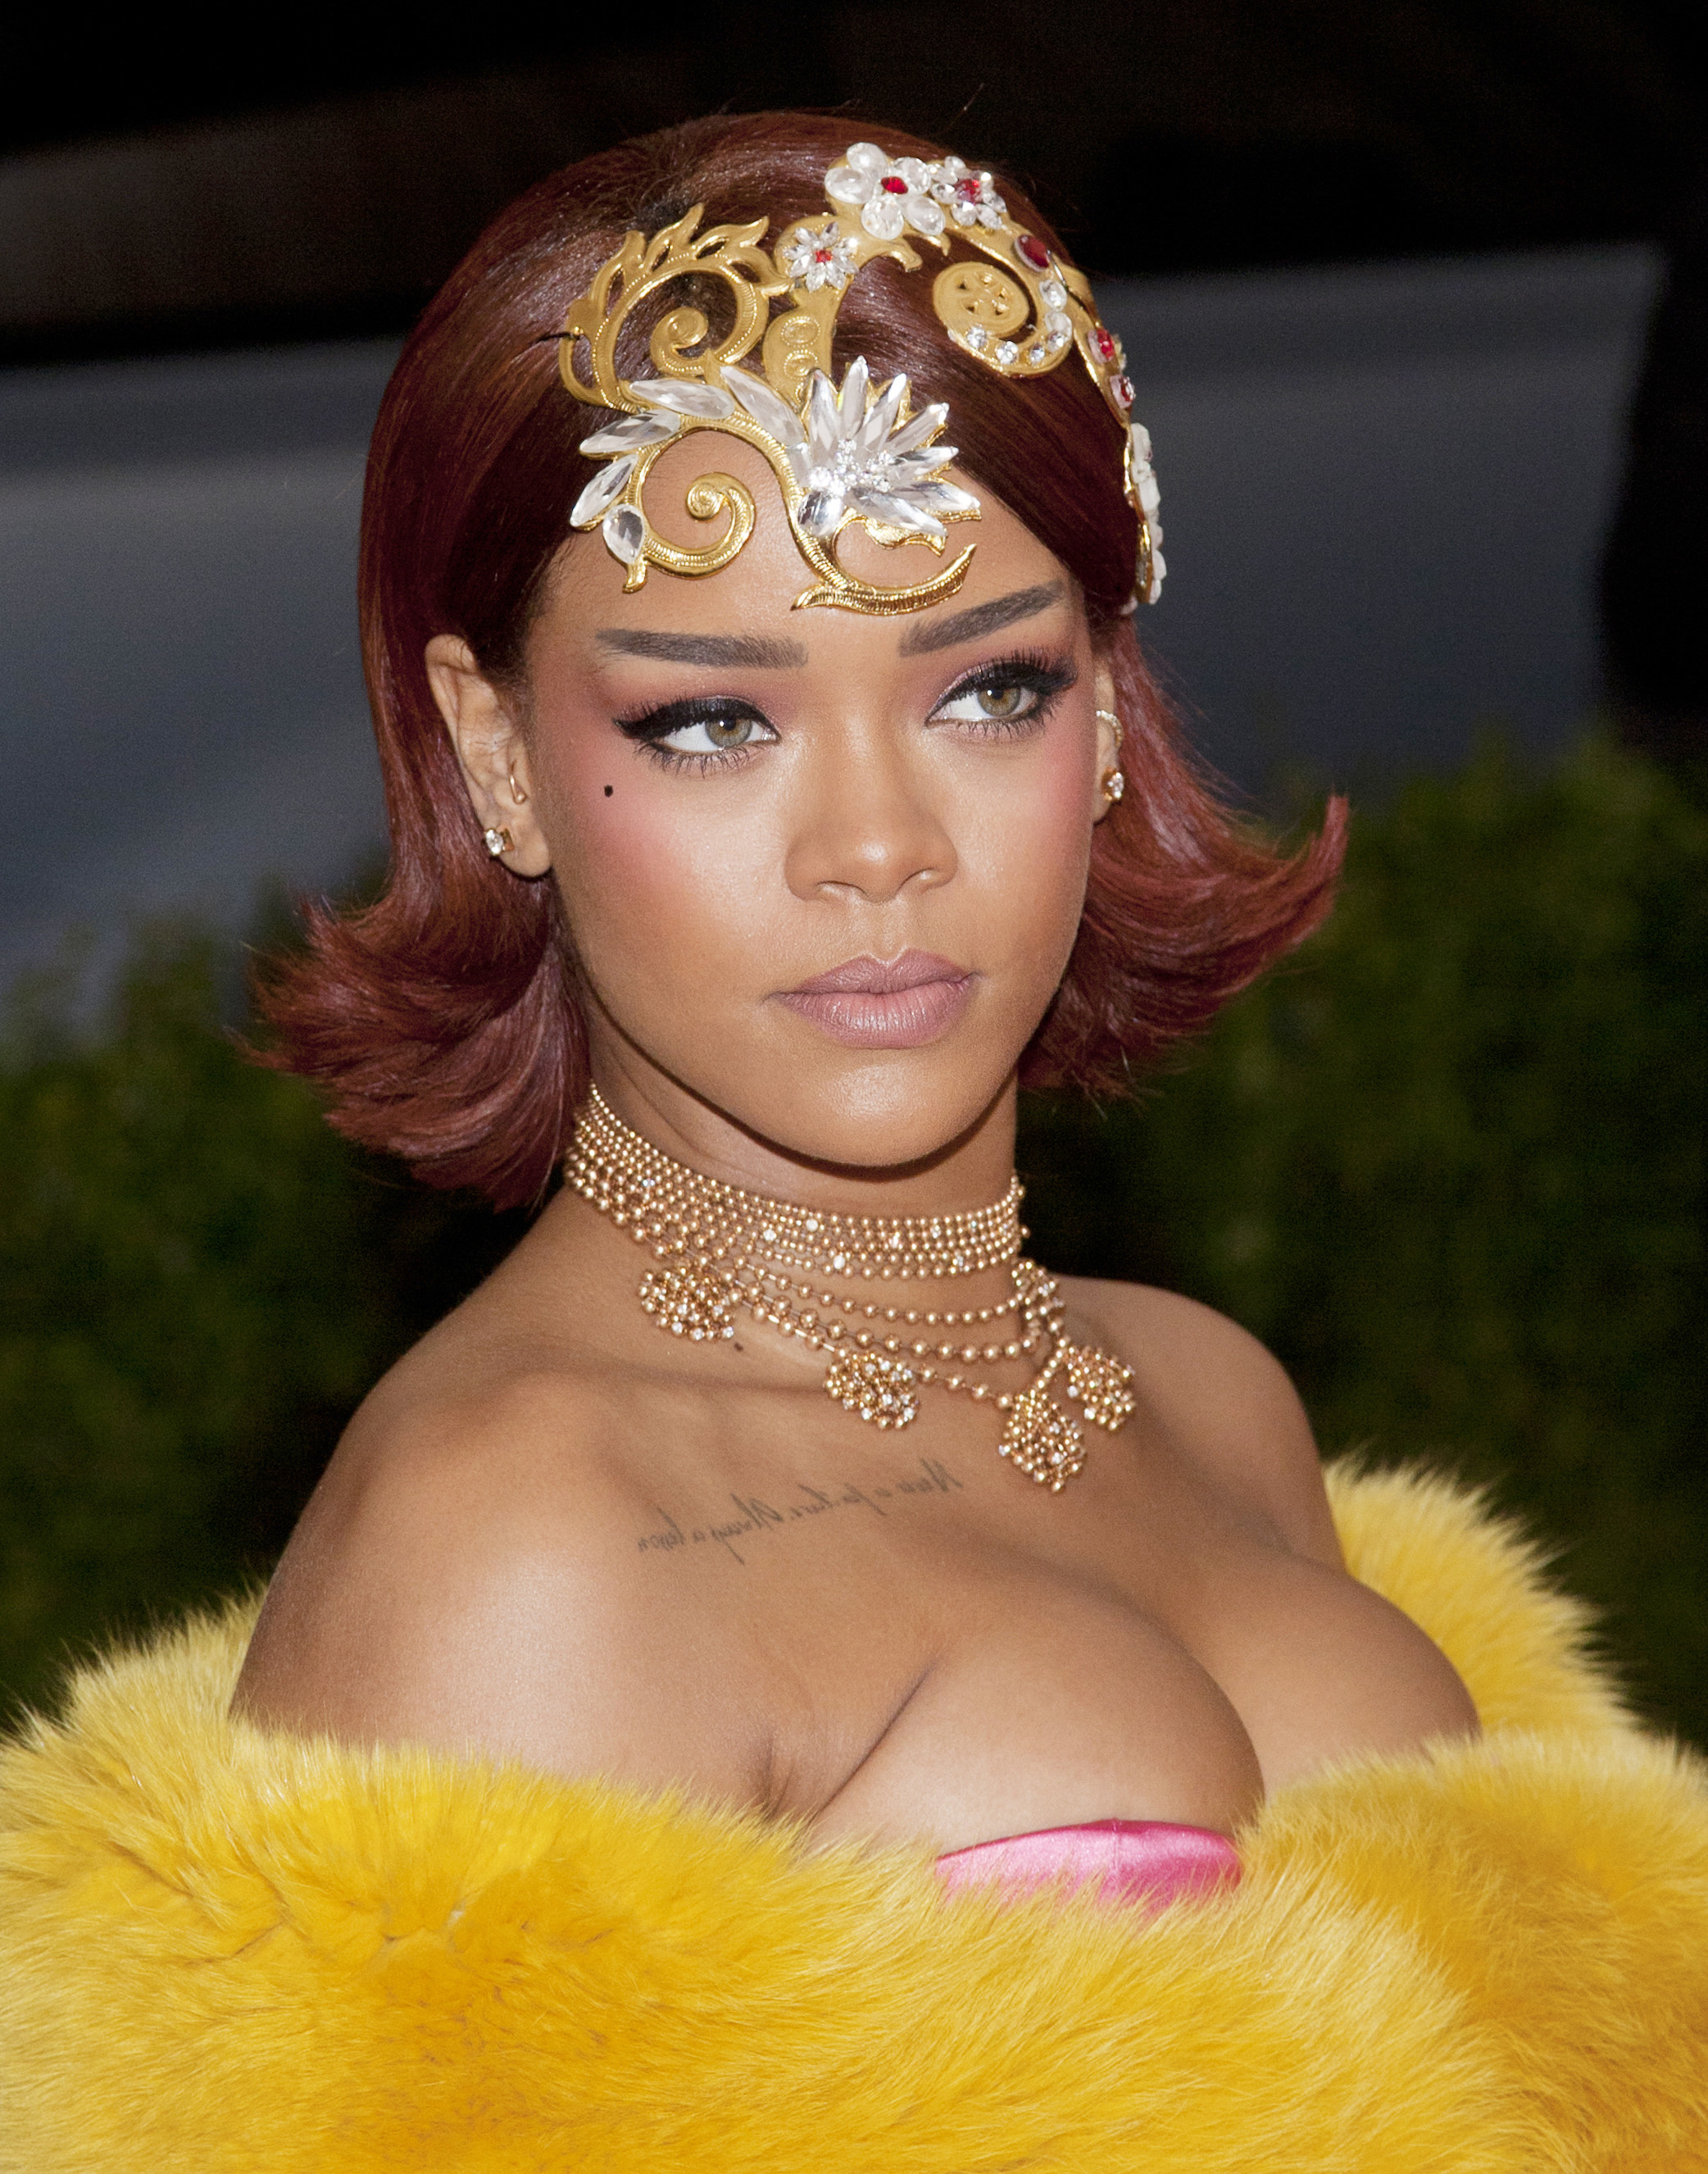 Close-up of Rihanna in bejeweled headband and necklace